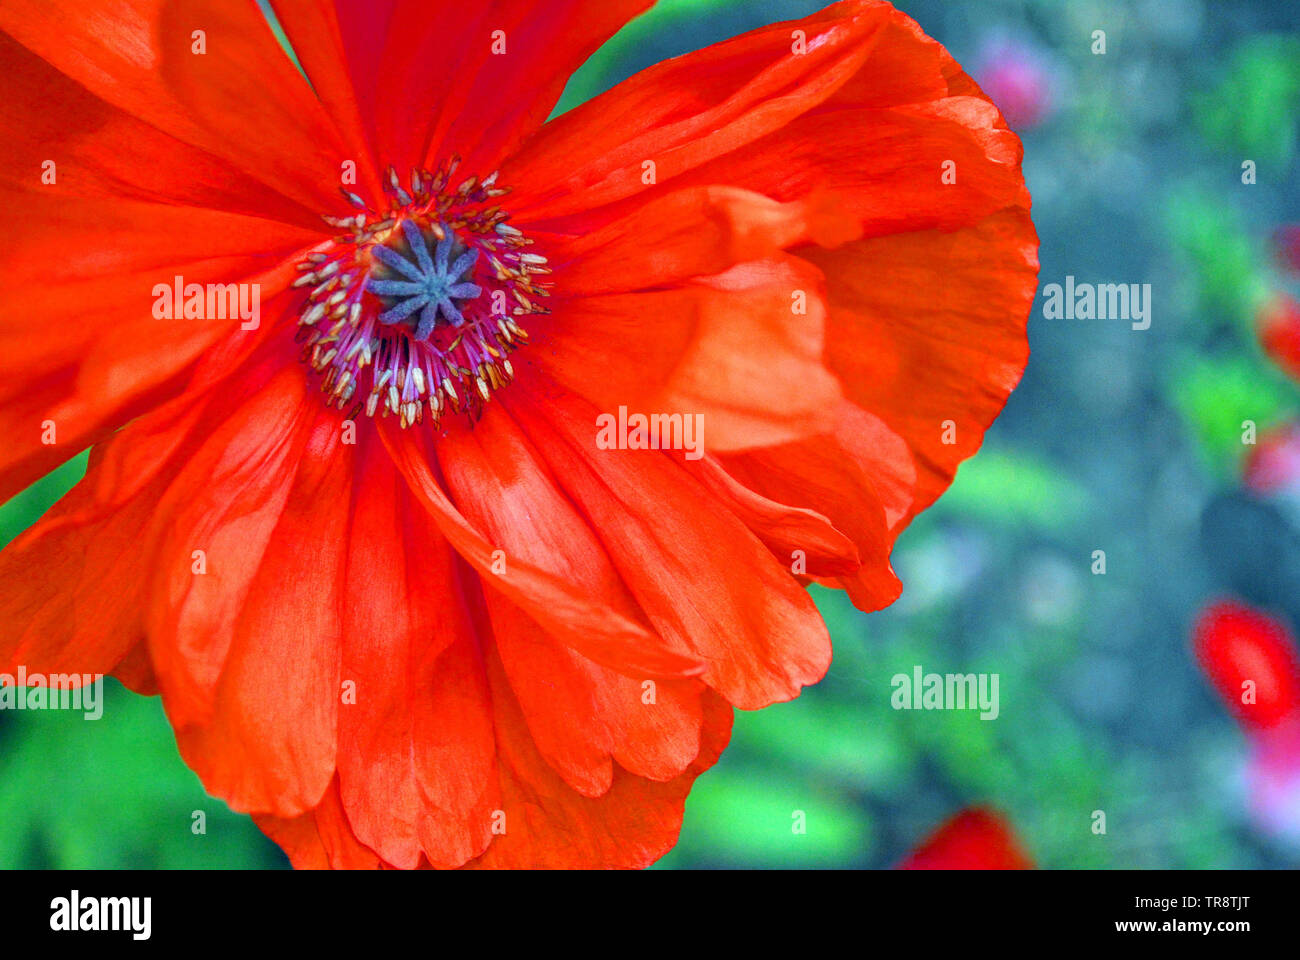 Blooming red-coral poppy, close-up detail, soft blurry green grass and grey soil background bokeh, top view Stock Photo